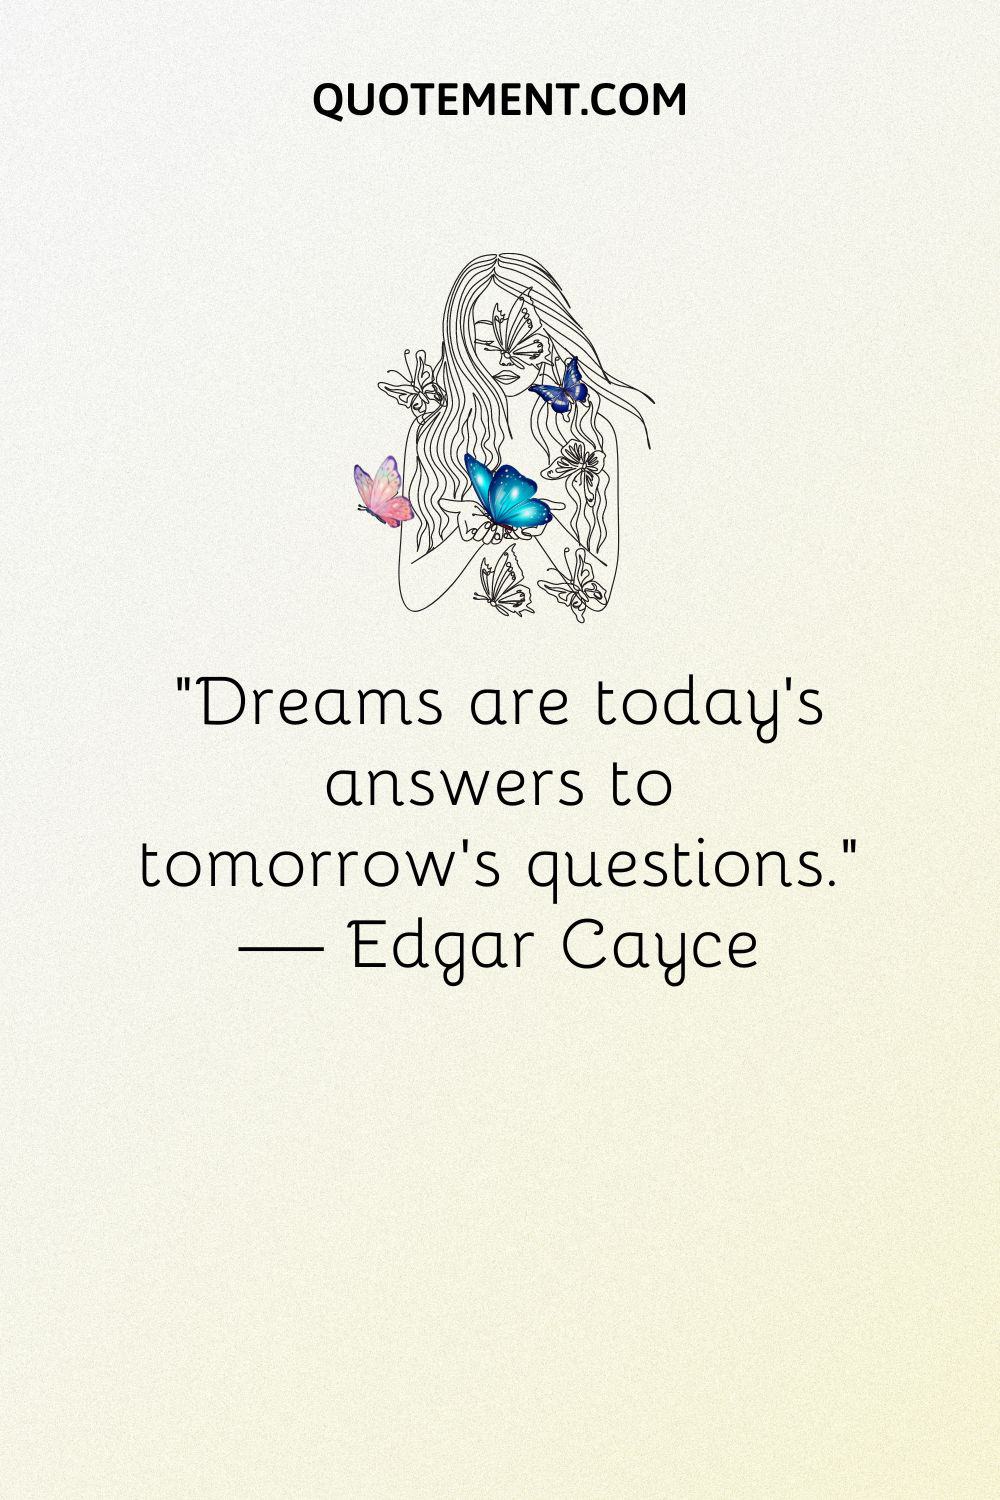 “Dreams are today’s answers to tomorrow’s questions.” — Edgar Cayce